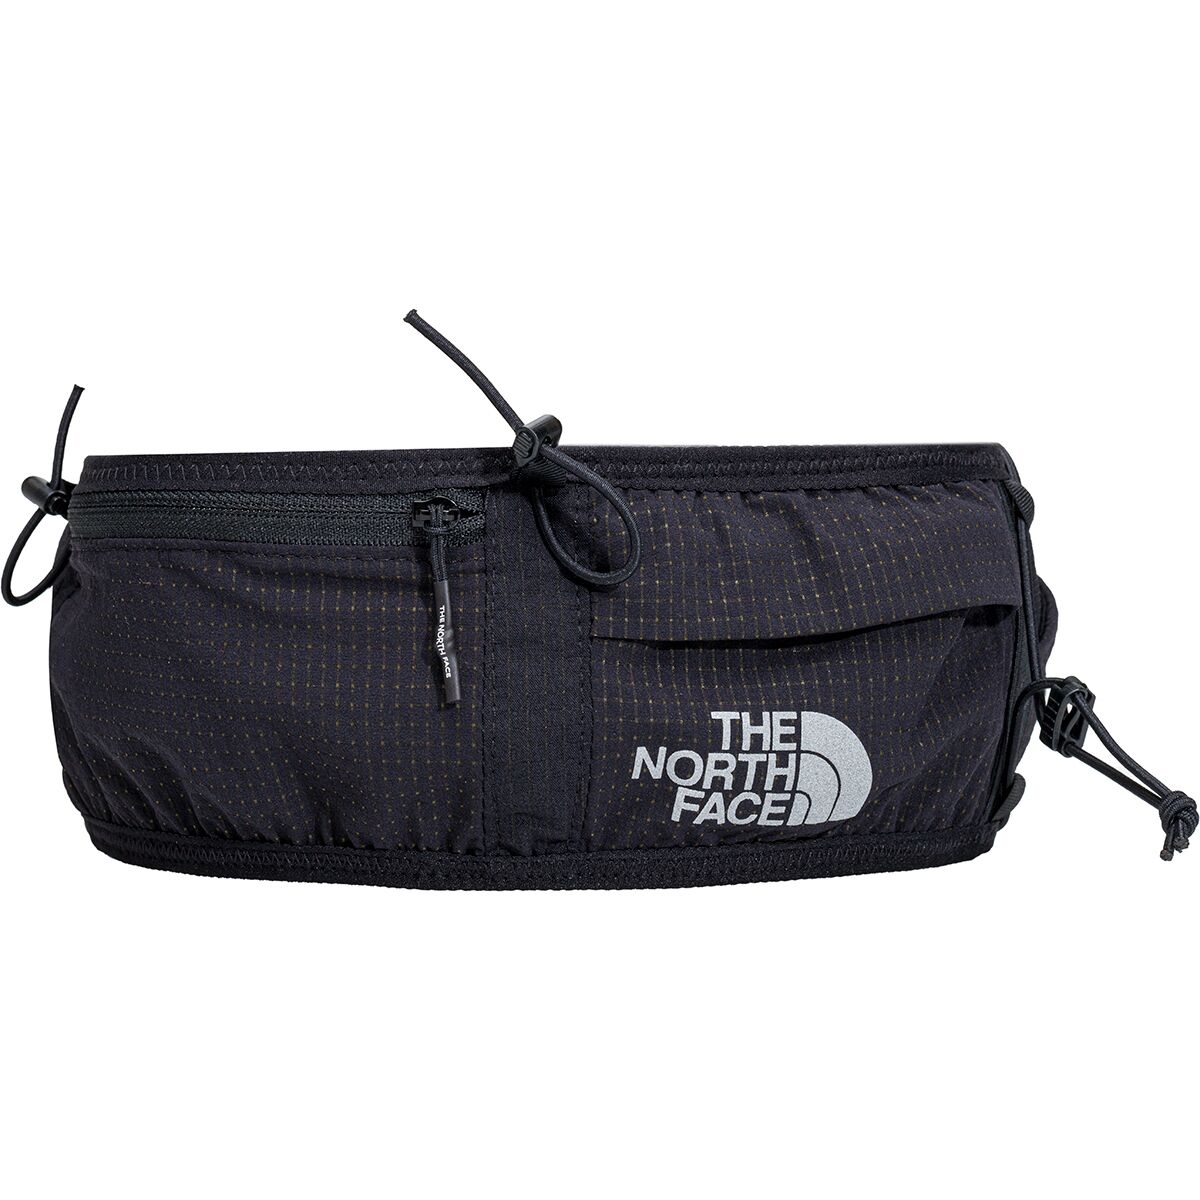 The North Face Flight Race Ready Belt Pack - Hike & Camp